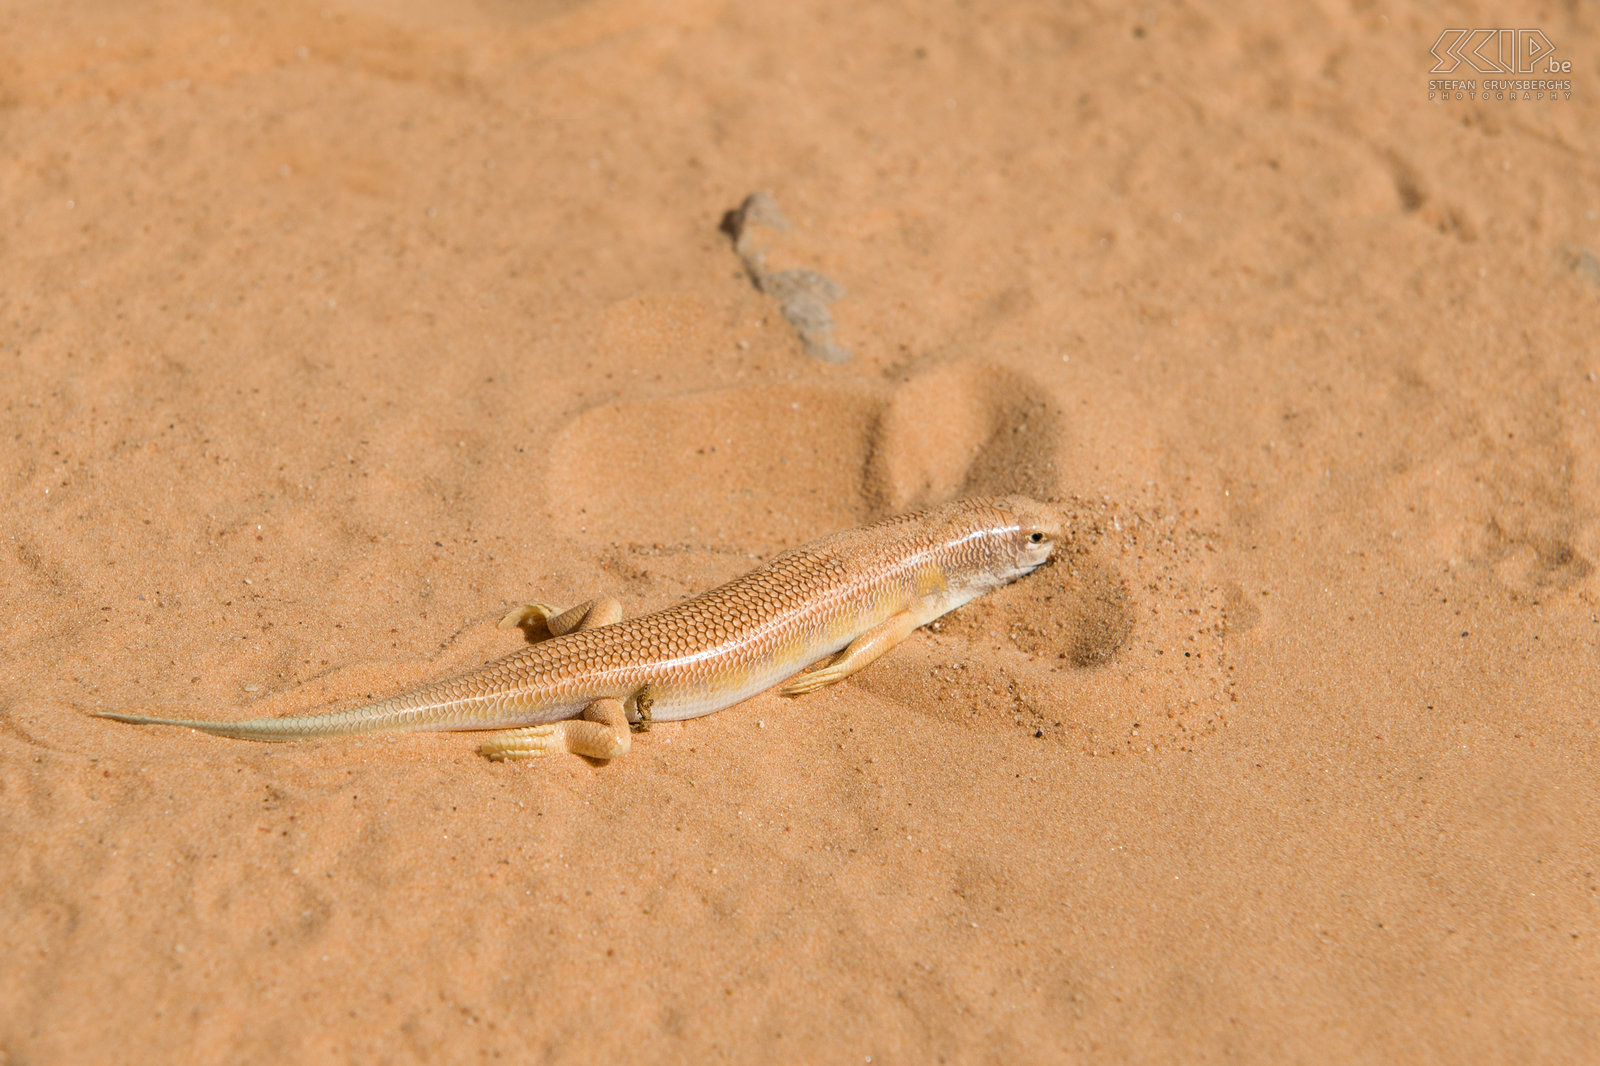 Sandfish This lizard can swim like fish in the sand and that is why it is called Sandfish (Scincus scincus). In French it is called 'Poisson de sable'. Stefan Cruysberghs